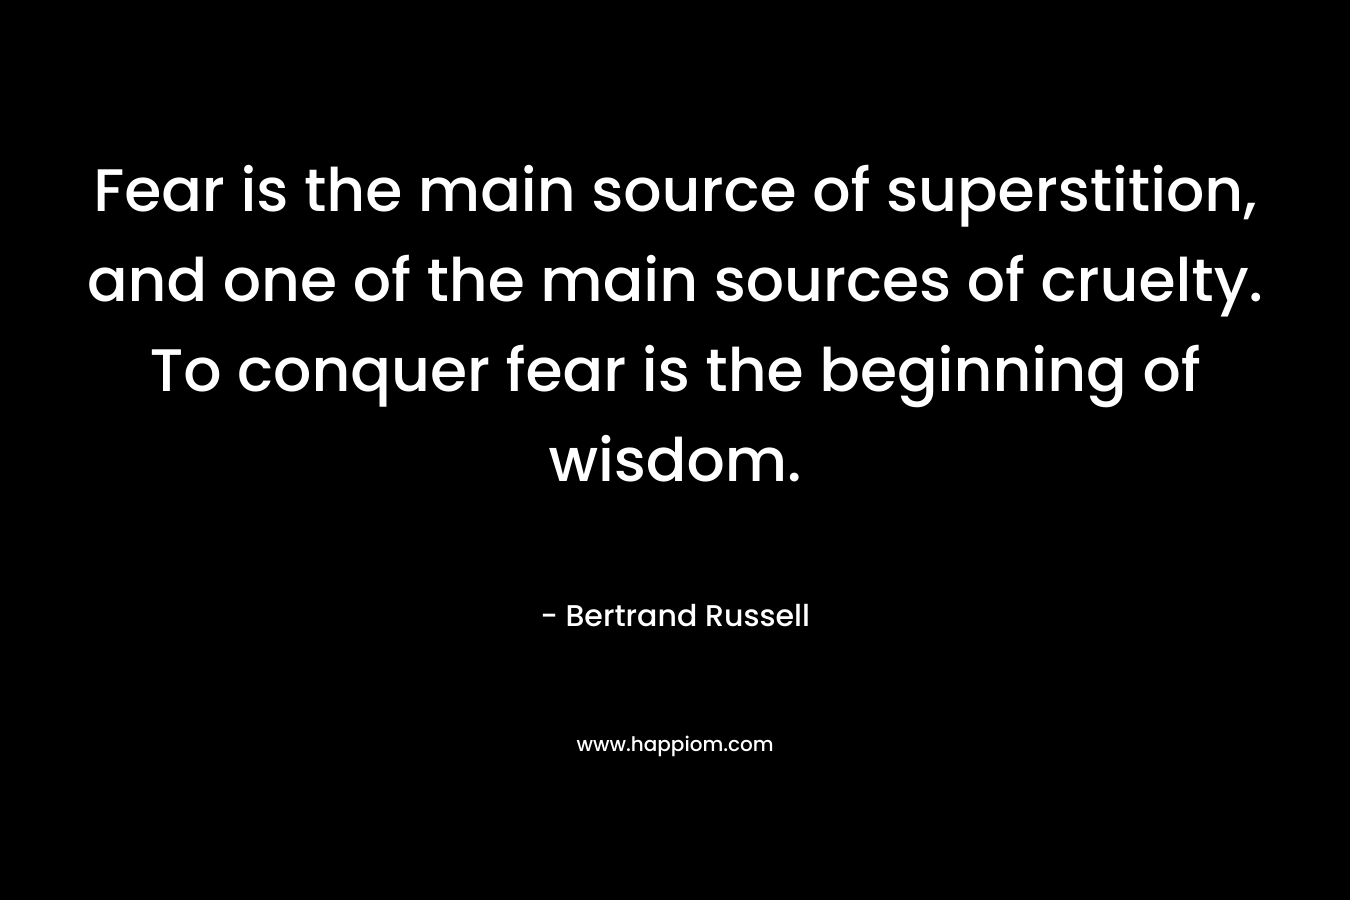 Fear is the main source of superstition, and one of the main sources of cruelty. To conquer fear is the beginning of wisdom.